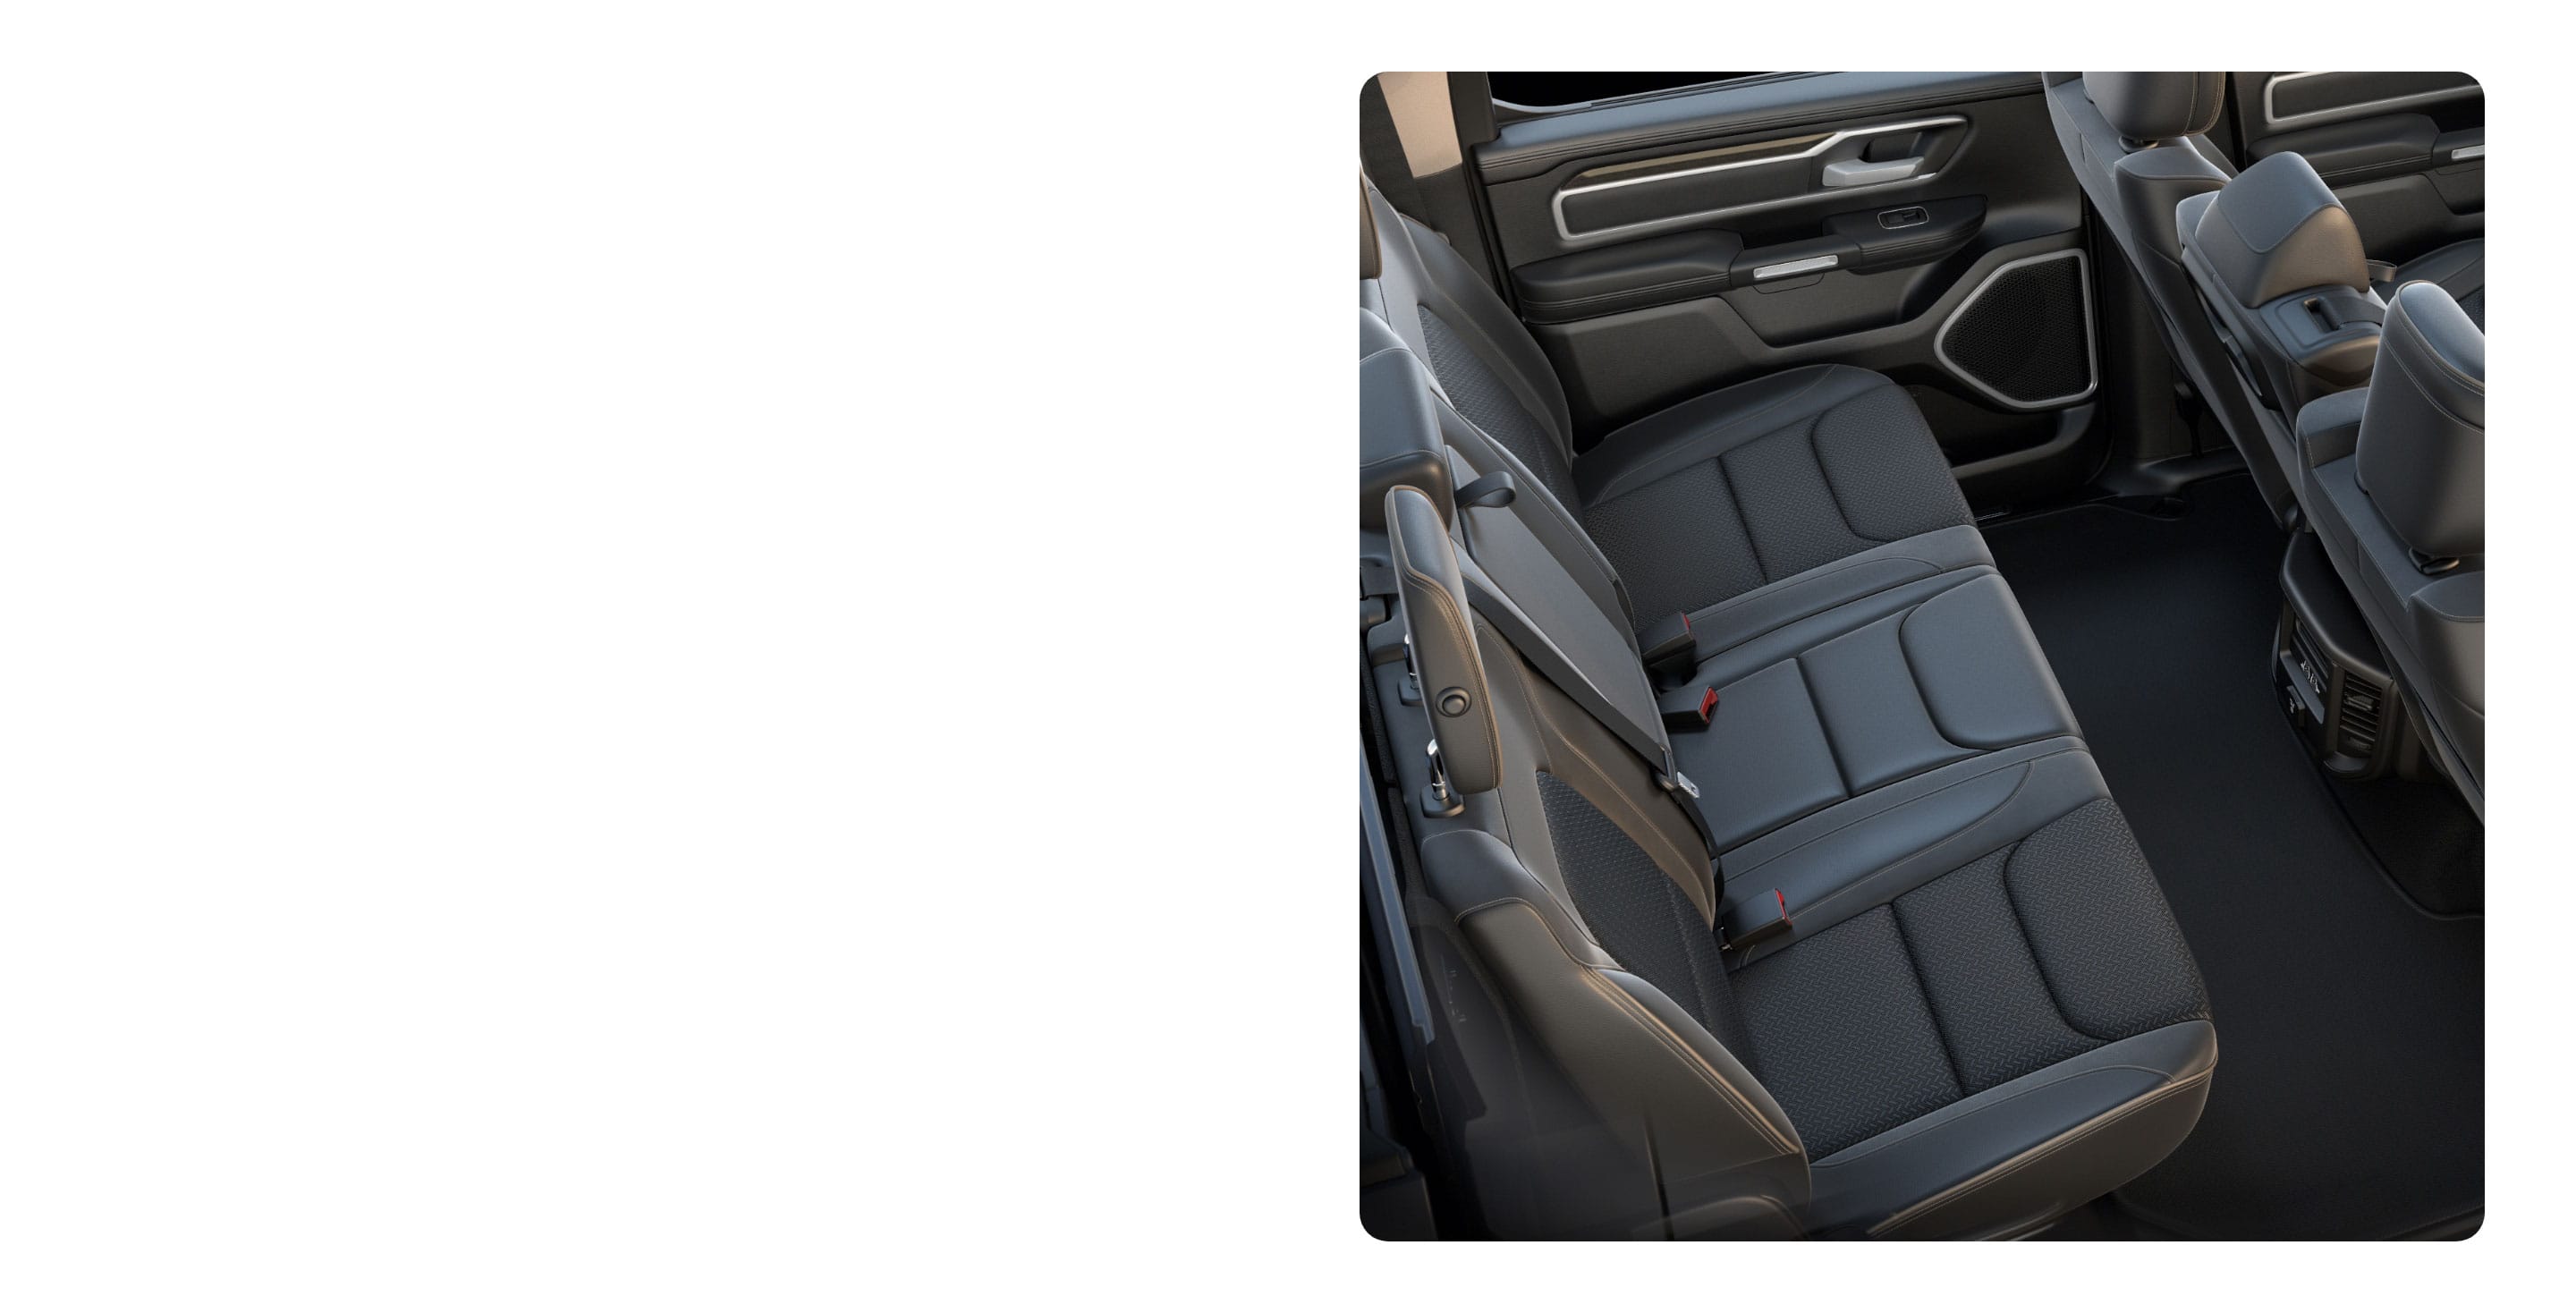 An overhead view of the three-passenger rear seat on the 2021 Ram 1500, highlighting the generous legroom.